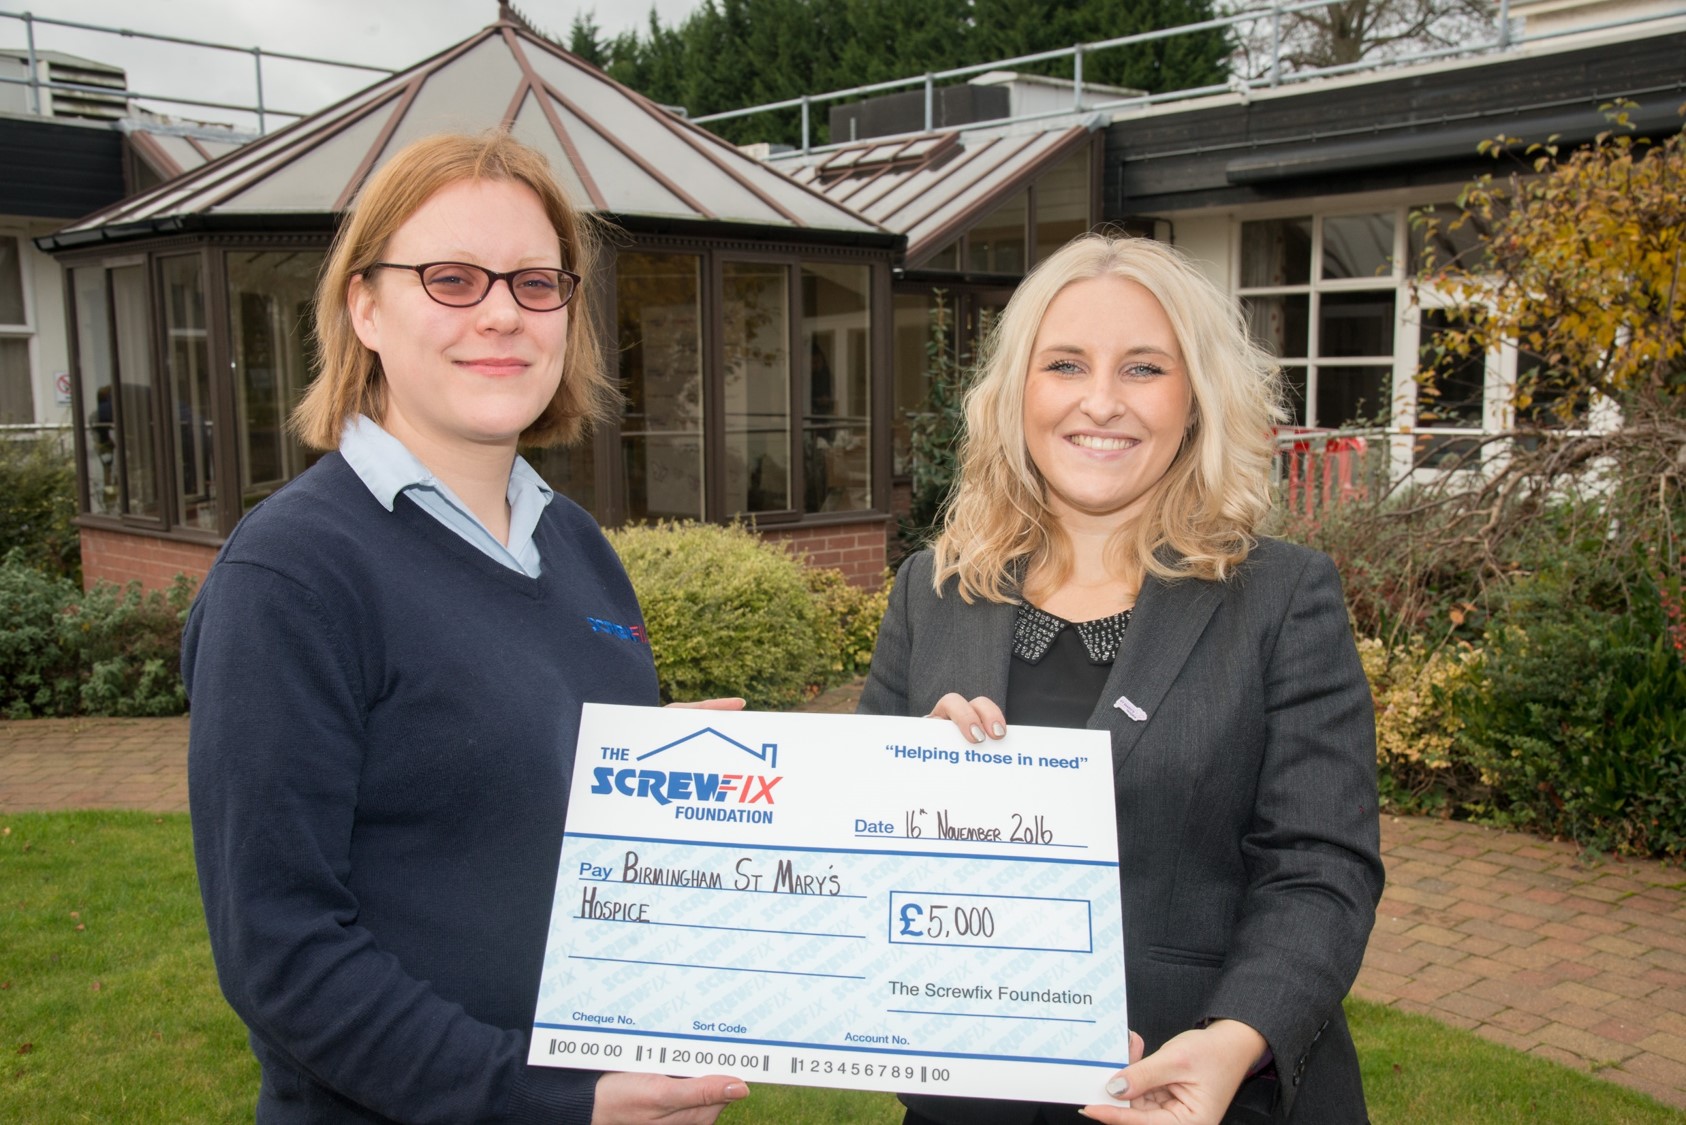 Birmingham St Mary’s Hospice receives generous donation from the Screwfix Foundation